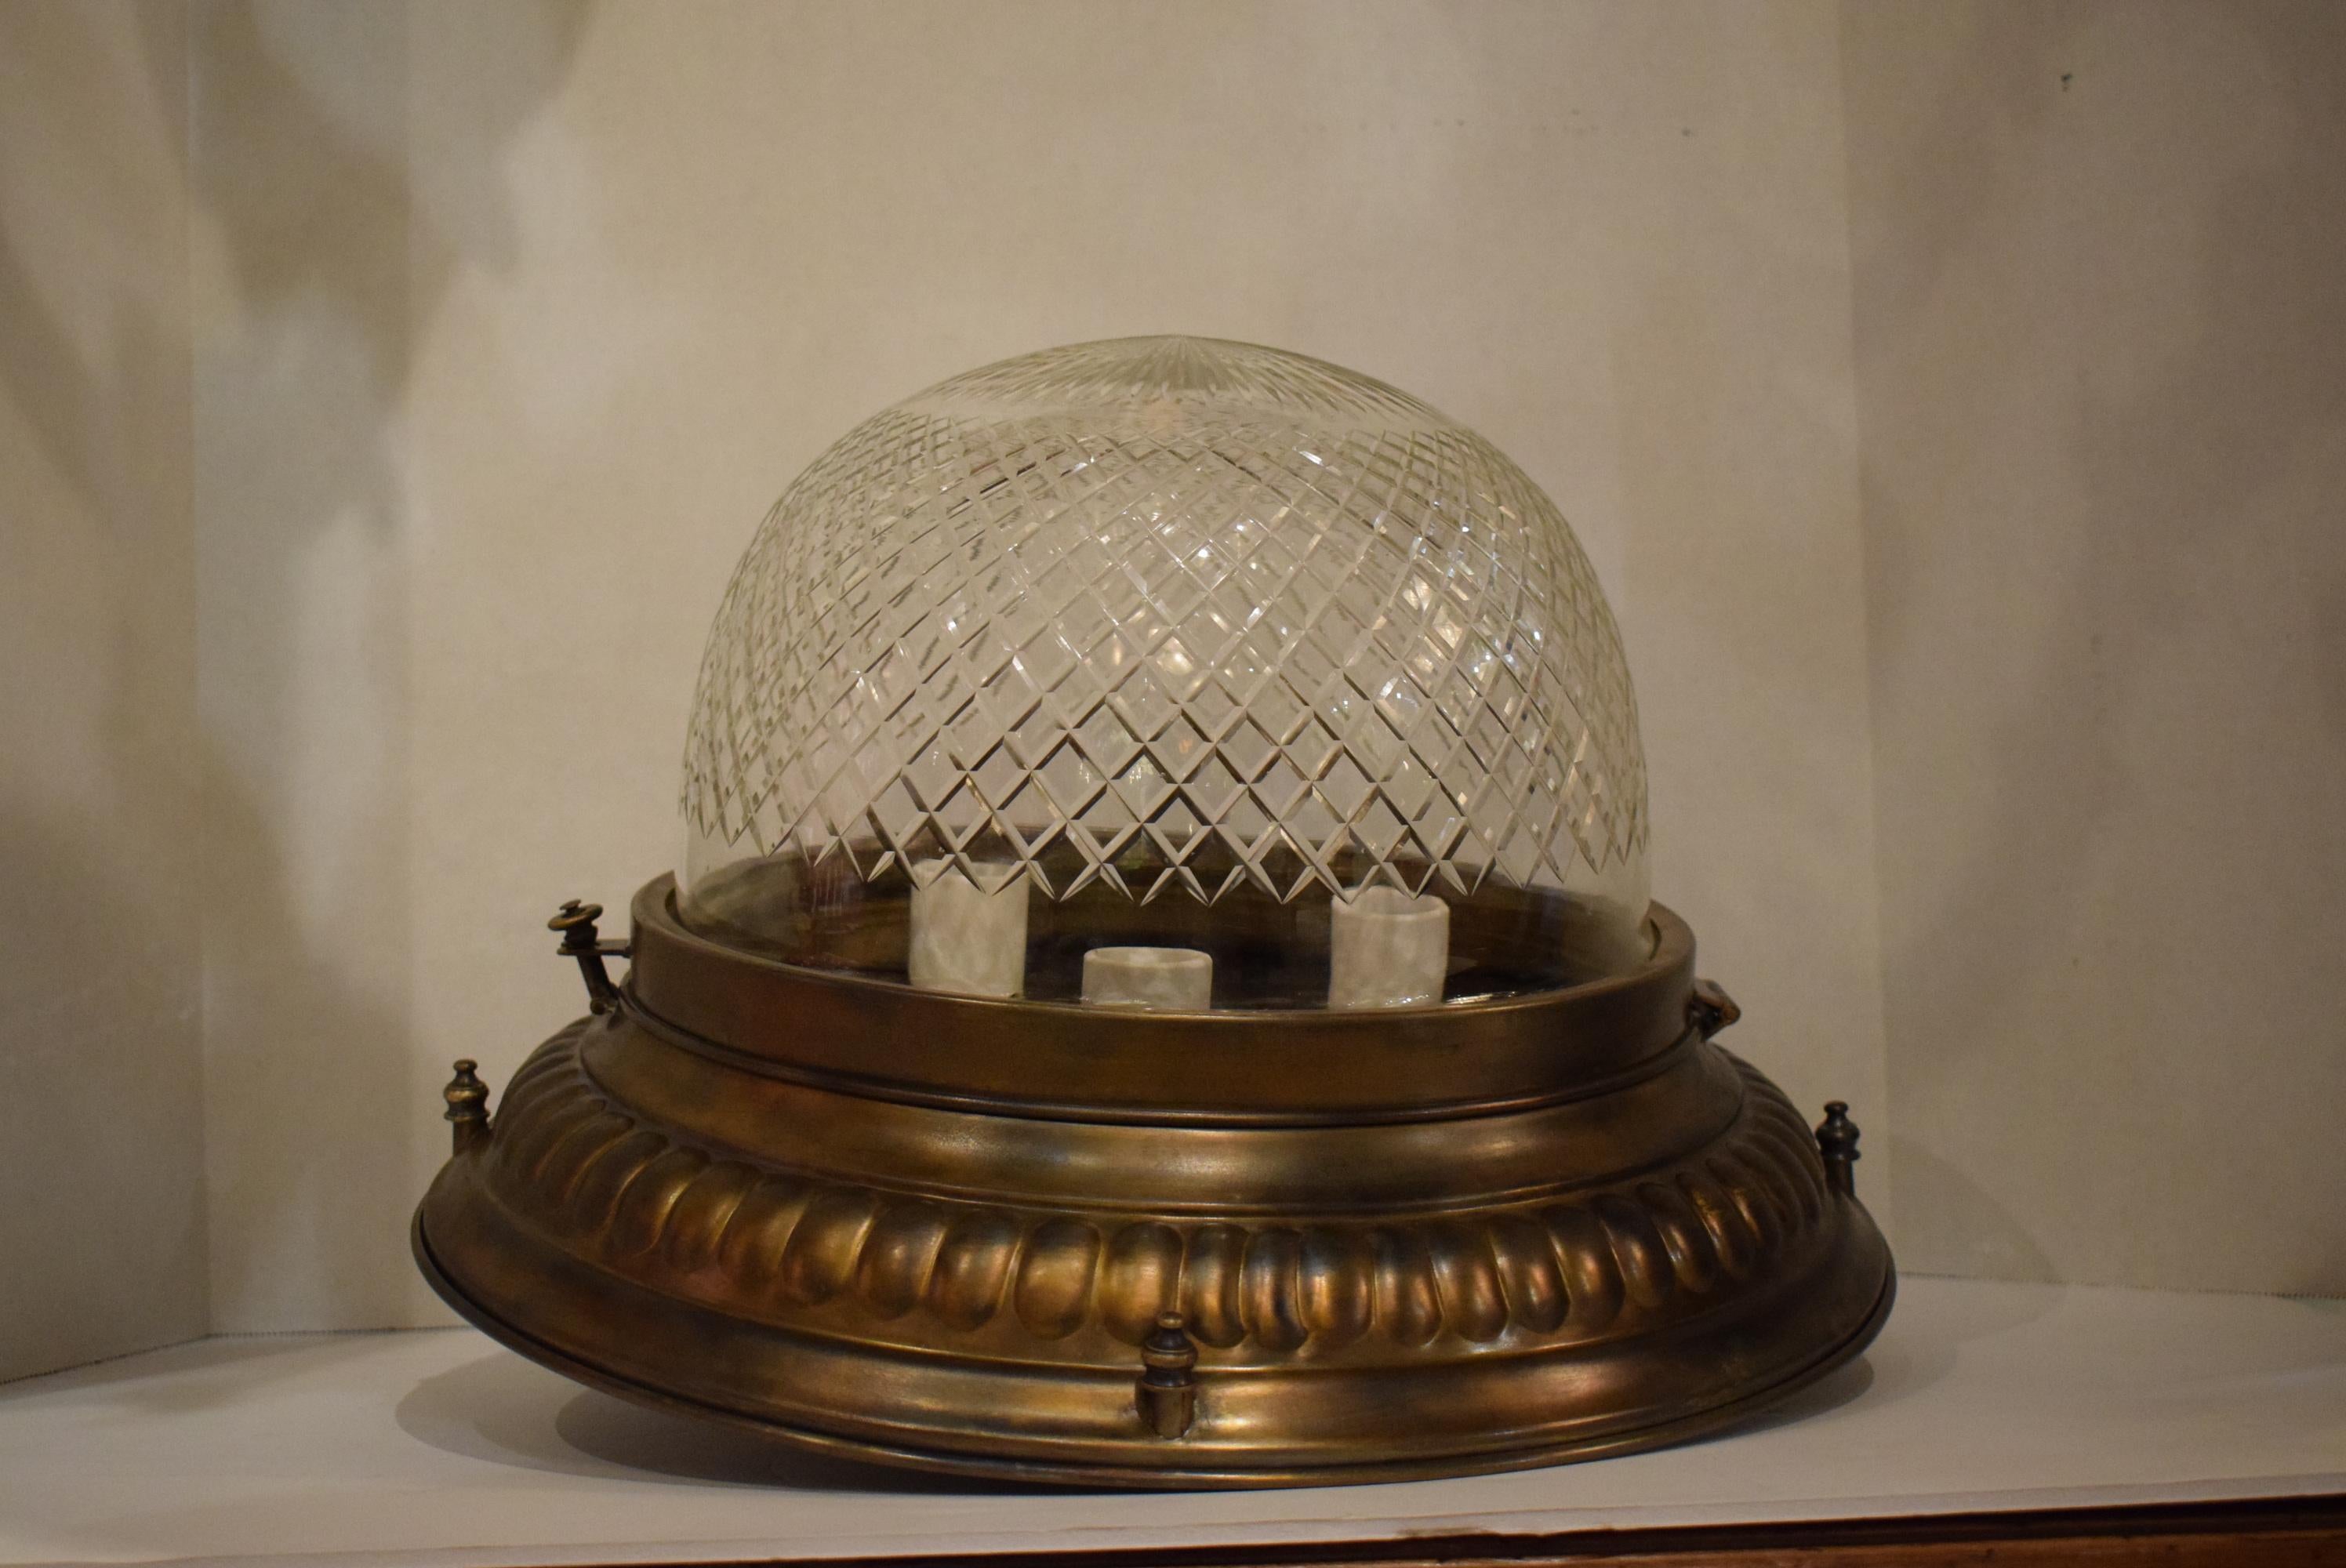 A fine gilt bronze plafonnier with handcut crystal dome, France, circa 1920. Three (3) lights
Dimensions: Height 11